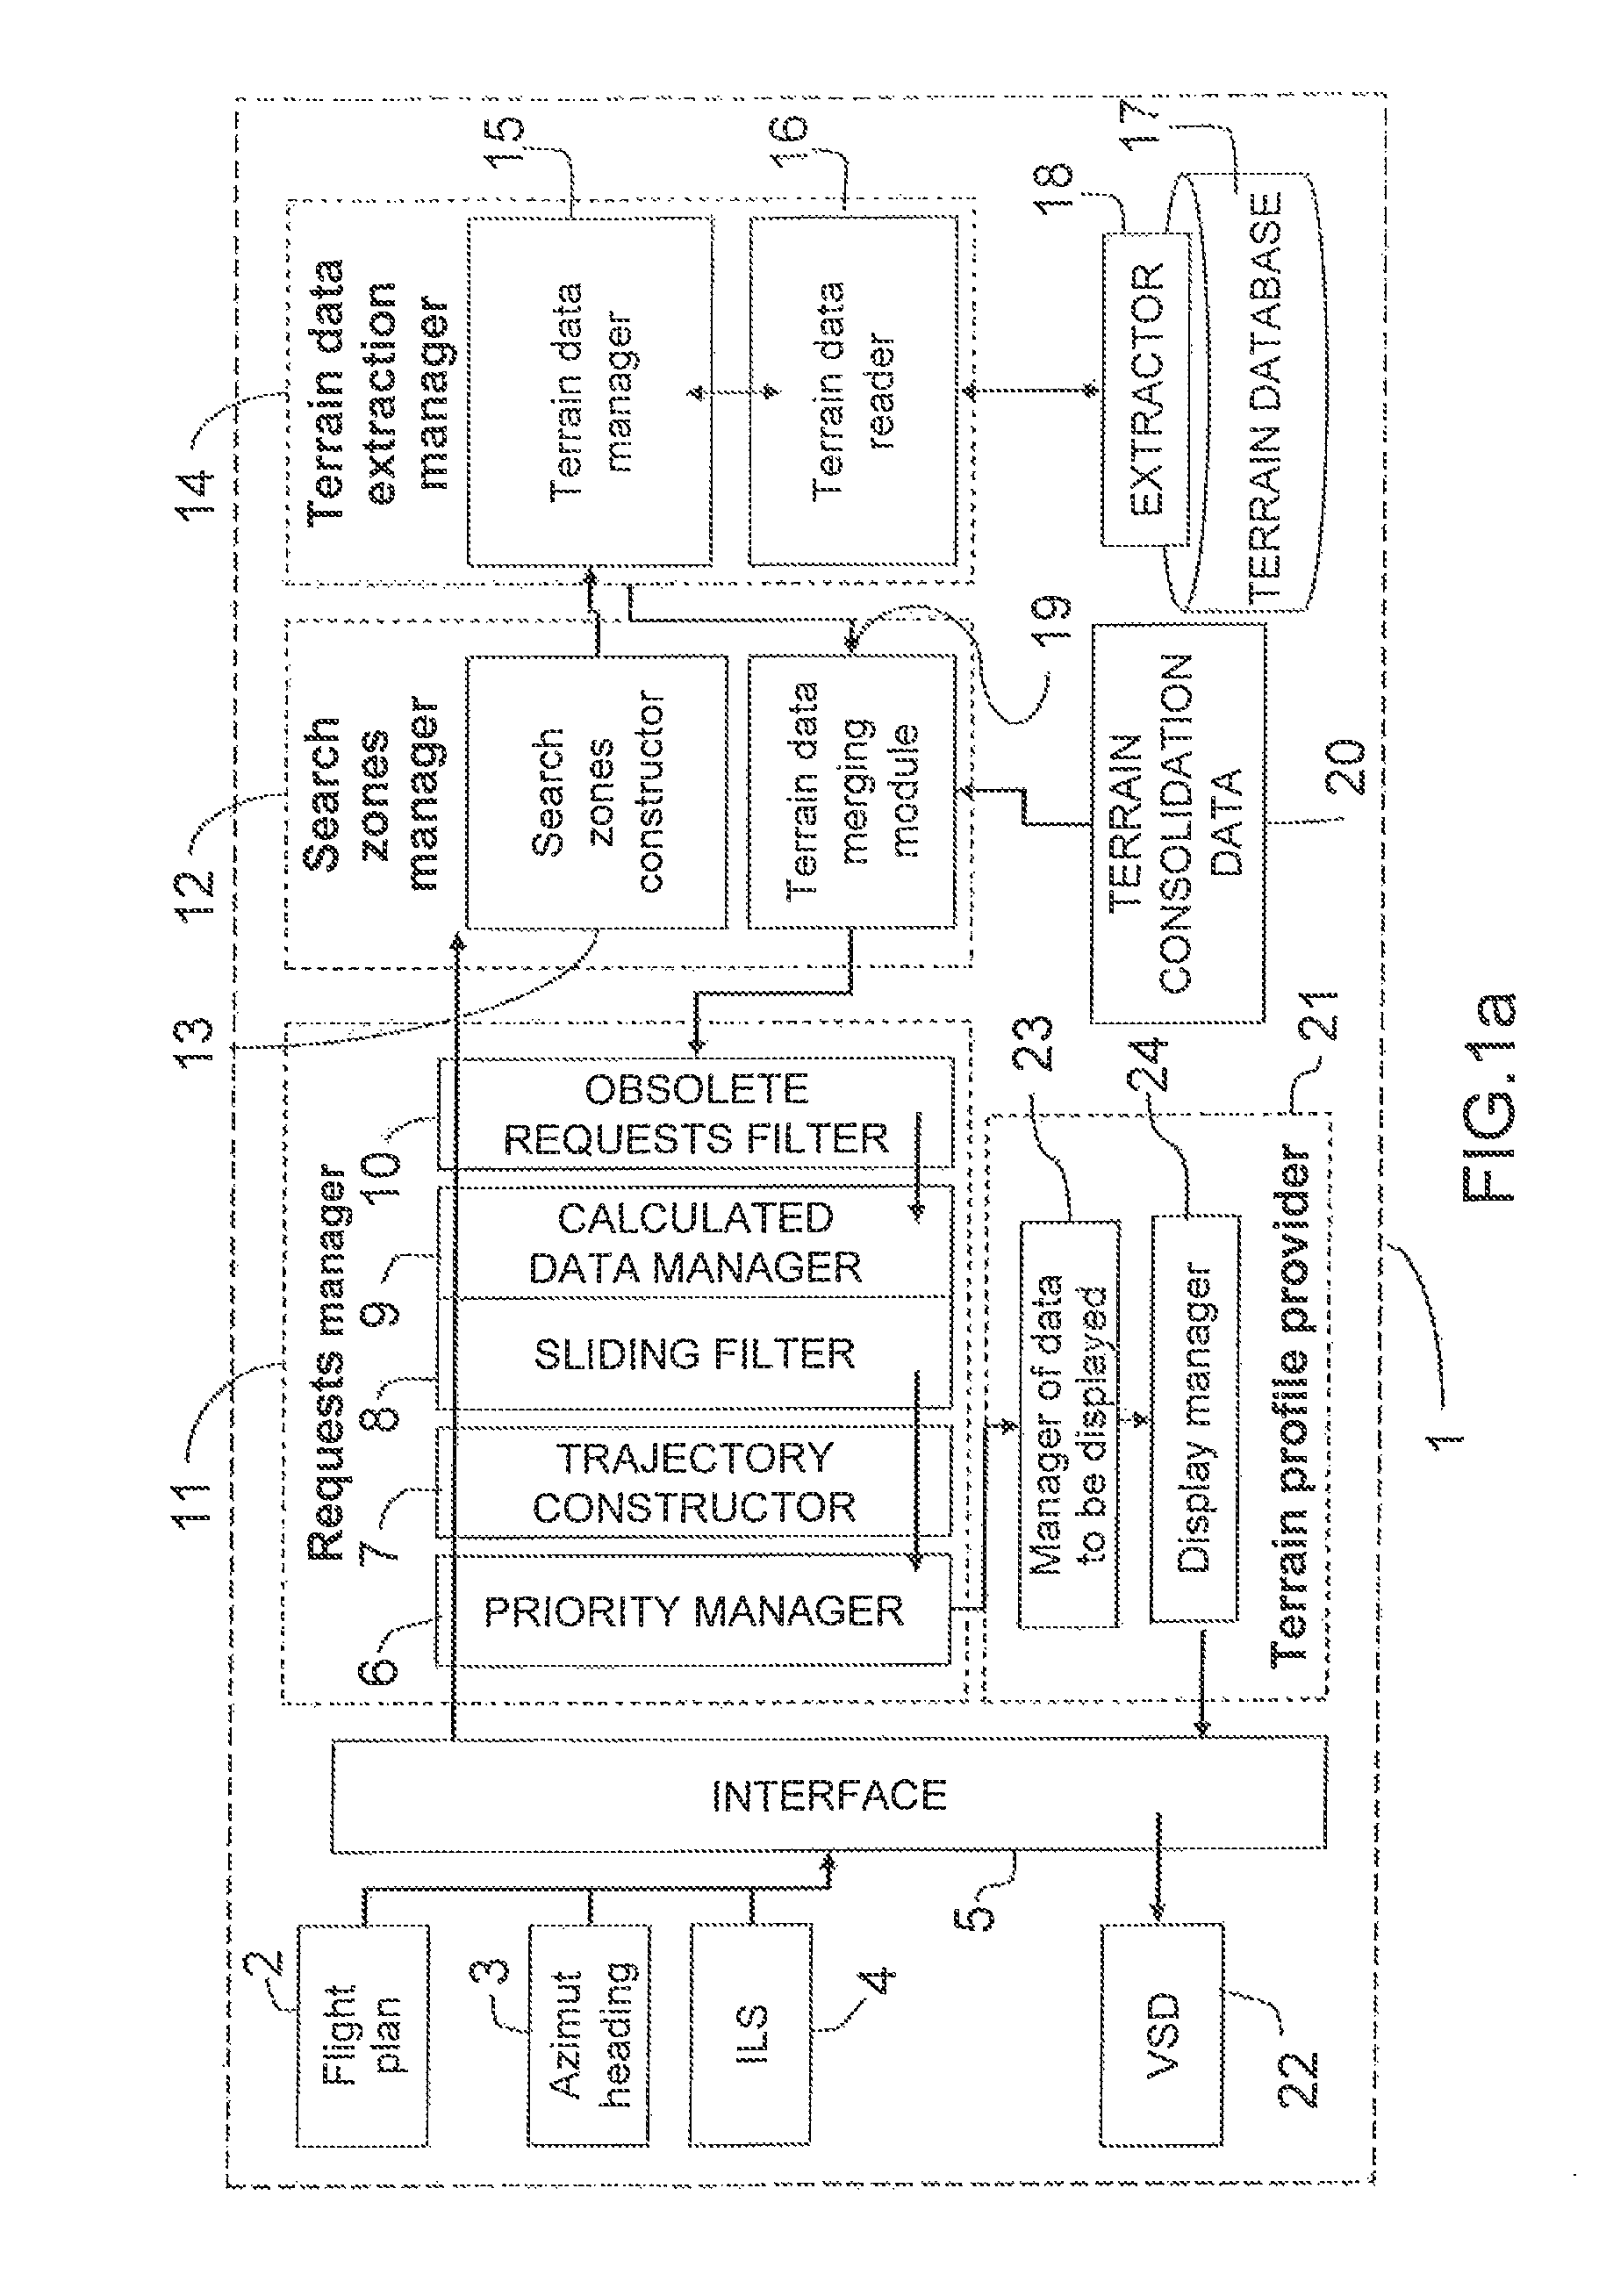 Device and method for extracting terrain altitudes